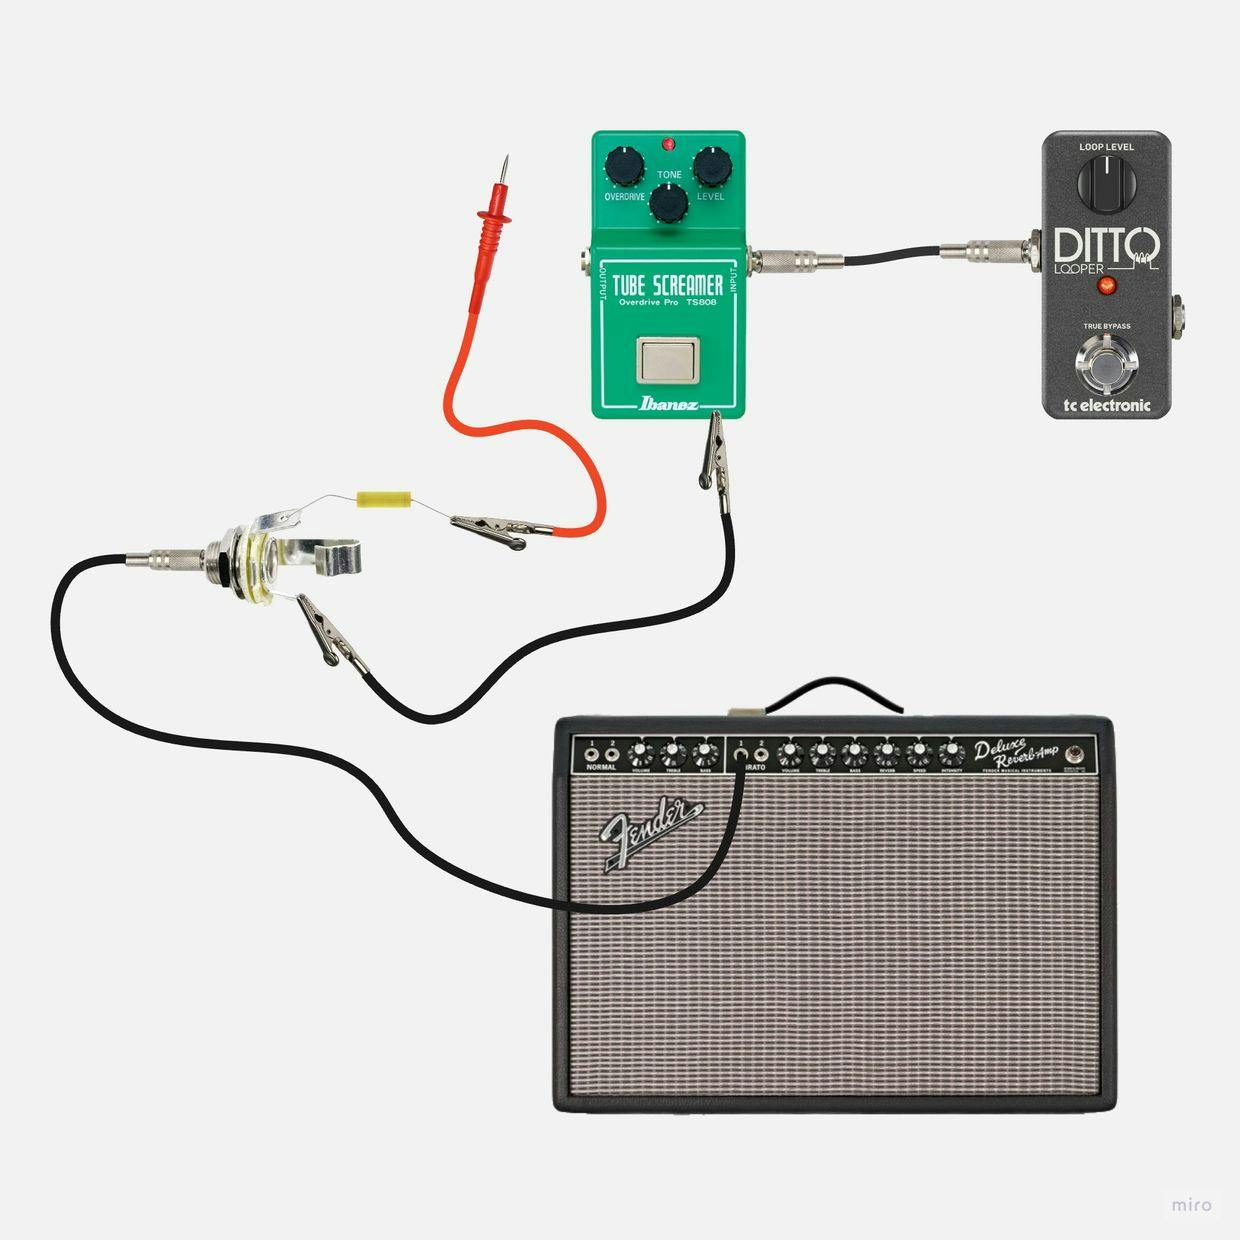 Audio probe with a looper pedal